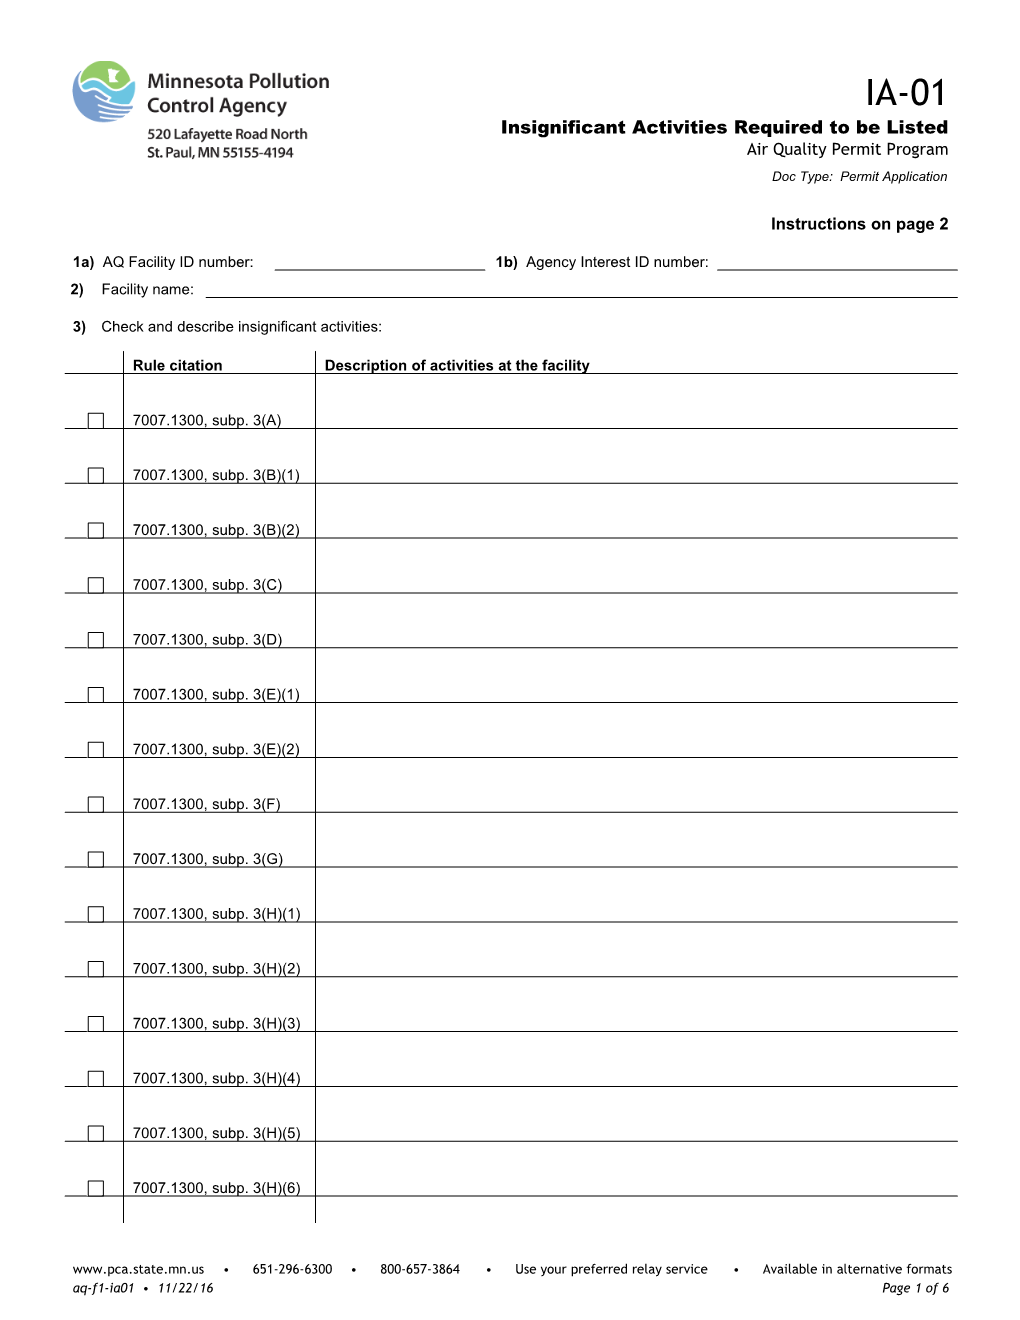 IA-01 Insignificant Activities Required to Be Listed - Air Quality Permit Program - Form